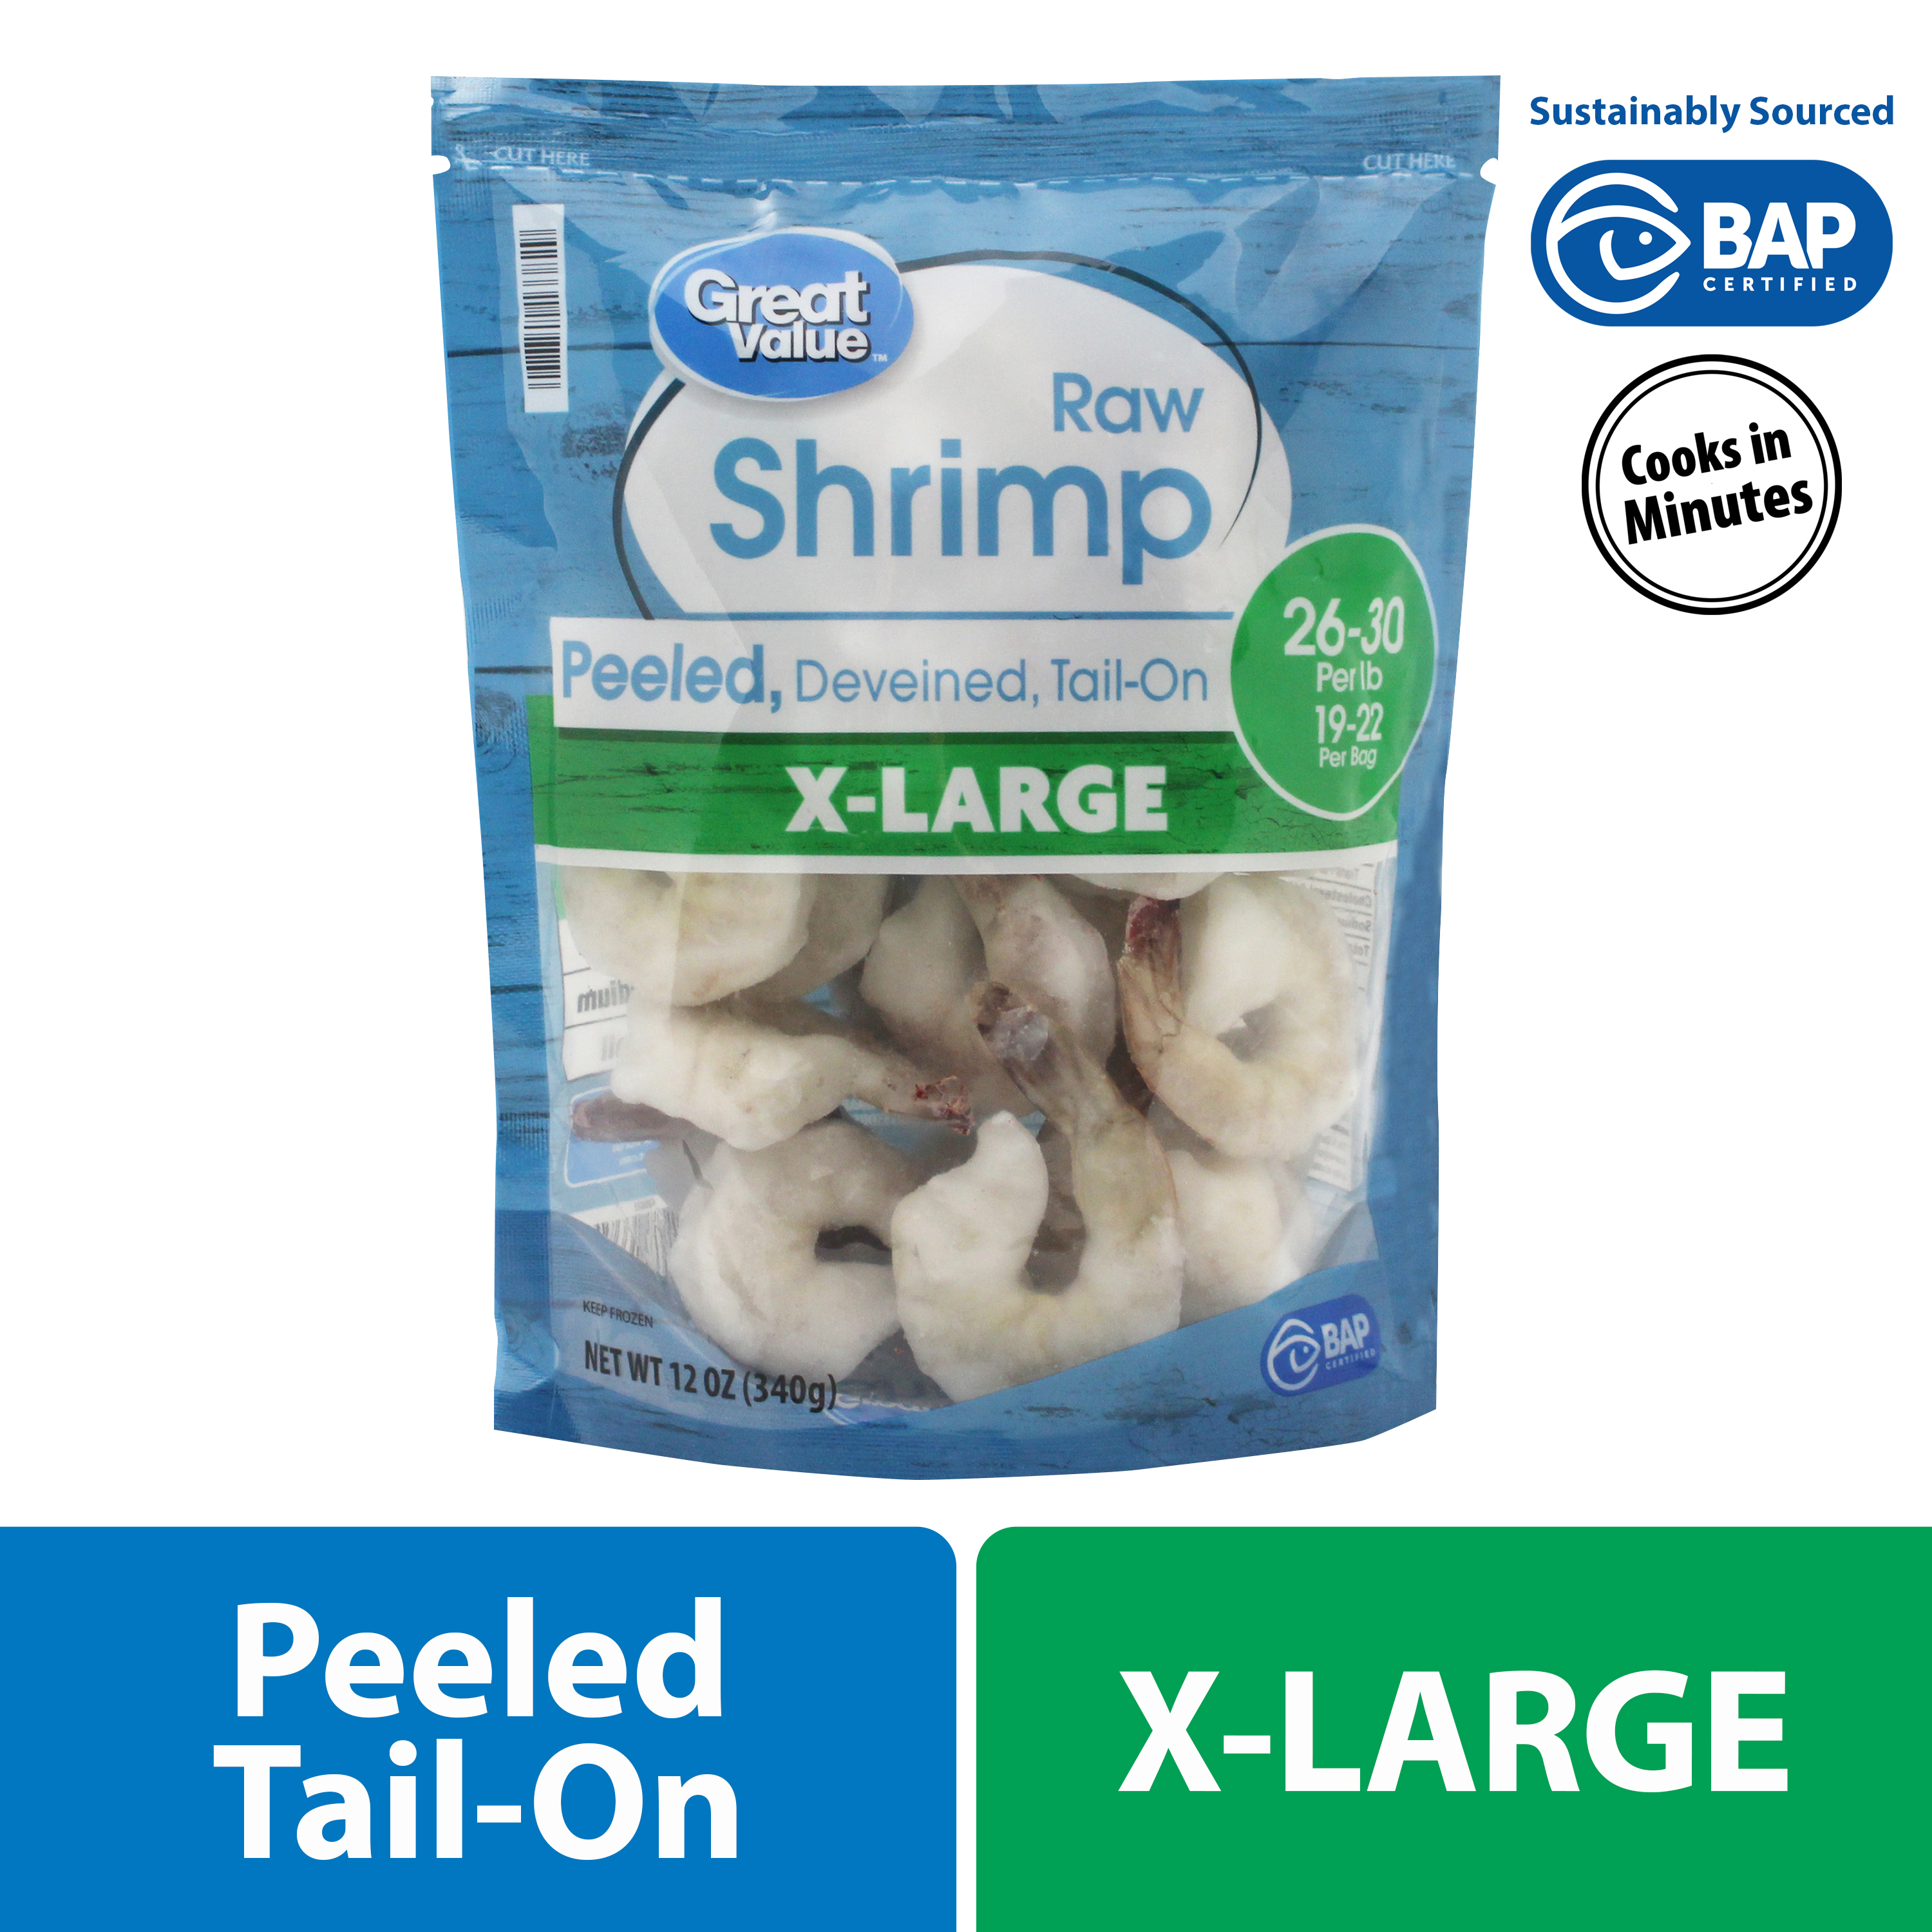 Great Value Frozen Peeled Tail on Extra Large Shrimp, 12 oz (26-30 Count per lb) - image 1 of 5